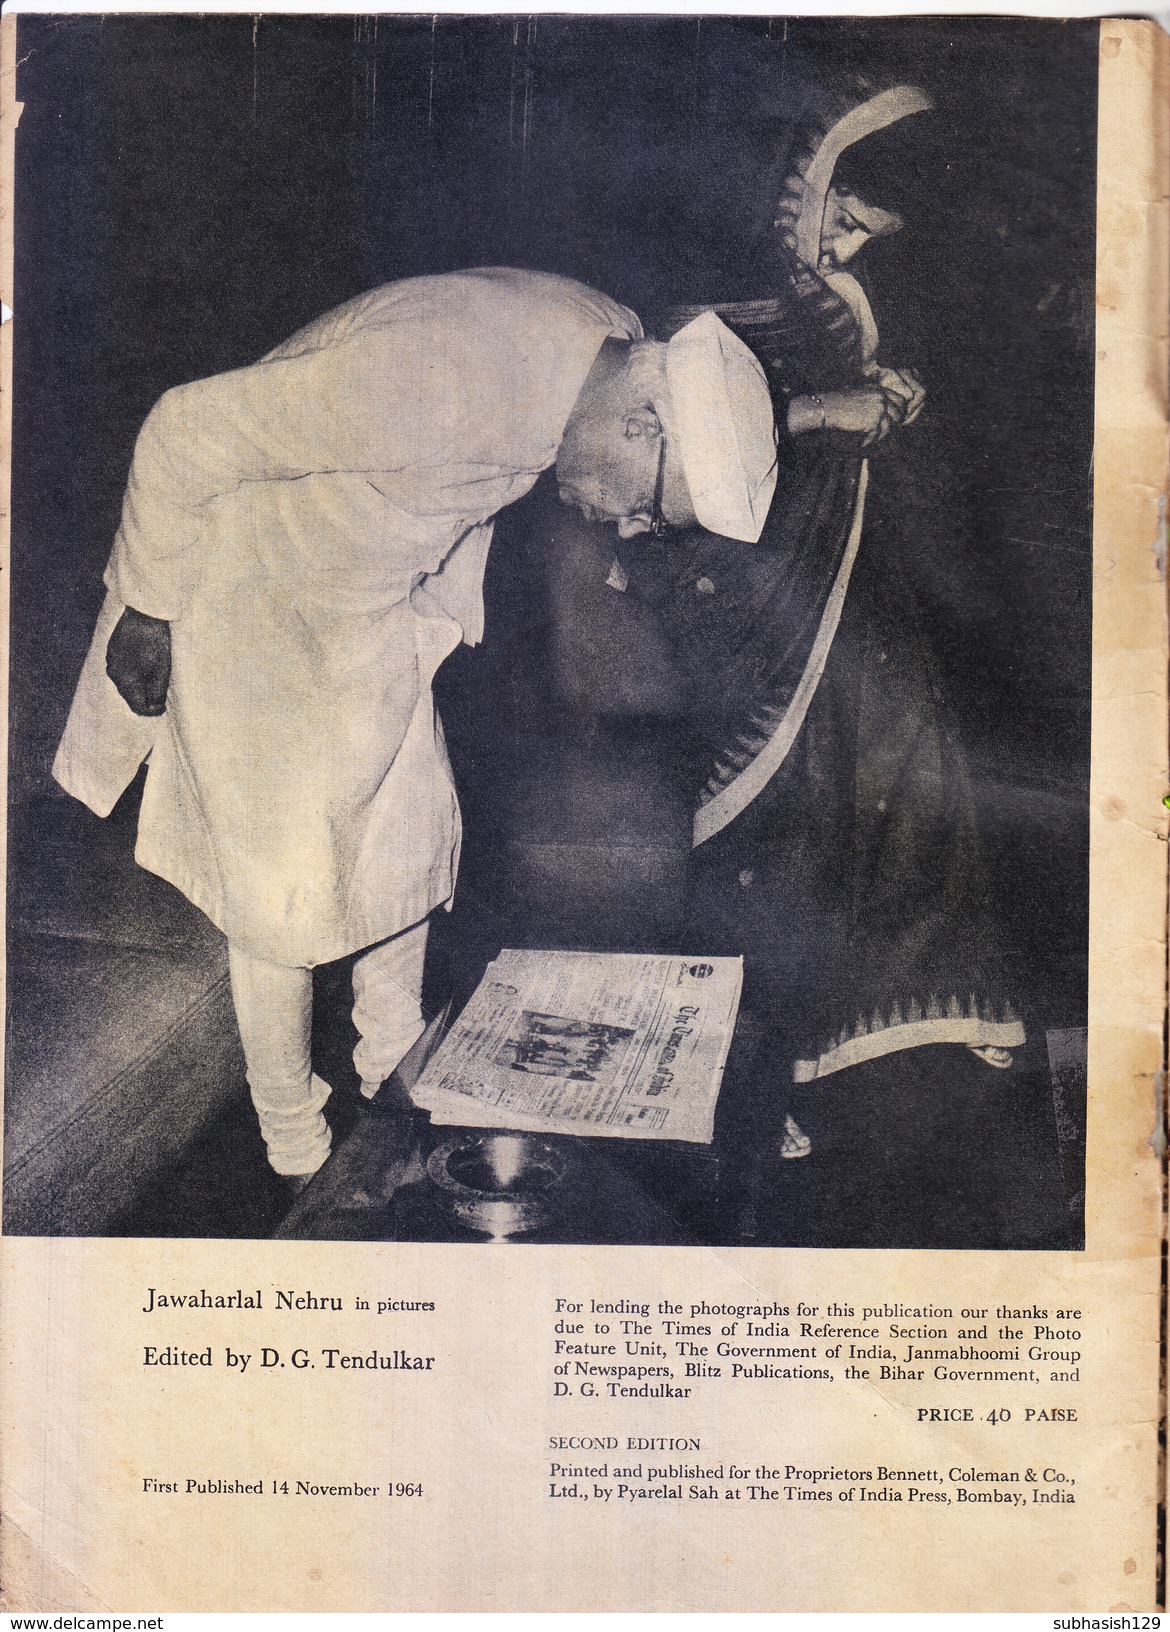 INDIA - 1964 TIMES OF INDIA SPECIAL ISSUE - JAWAHAR LAL NEHRU IN PICTURES - ORIGINAL SECOND EDITION / NOT A REPRINT - Books On Collecting